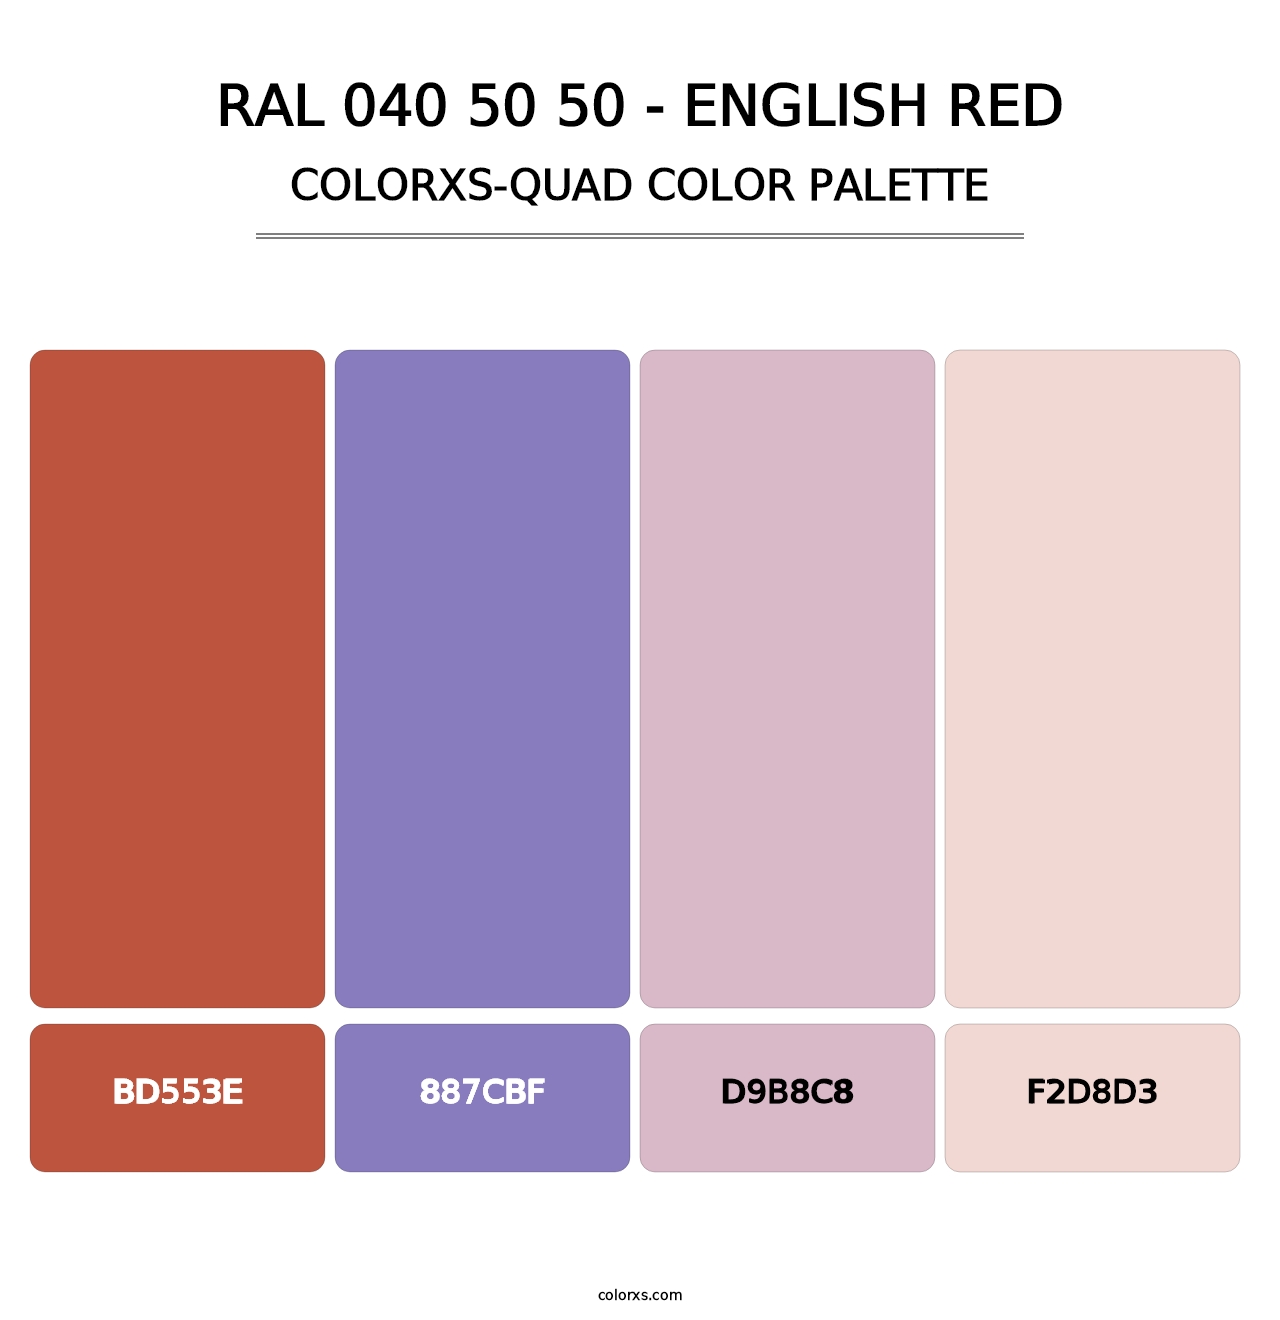 RAL 040 50 50 - English Red - Colorxs Quad Palette